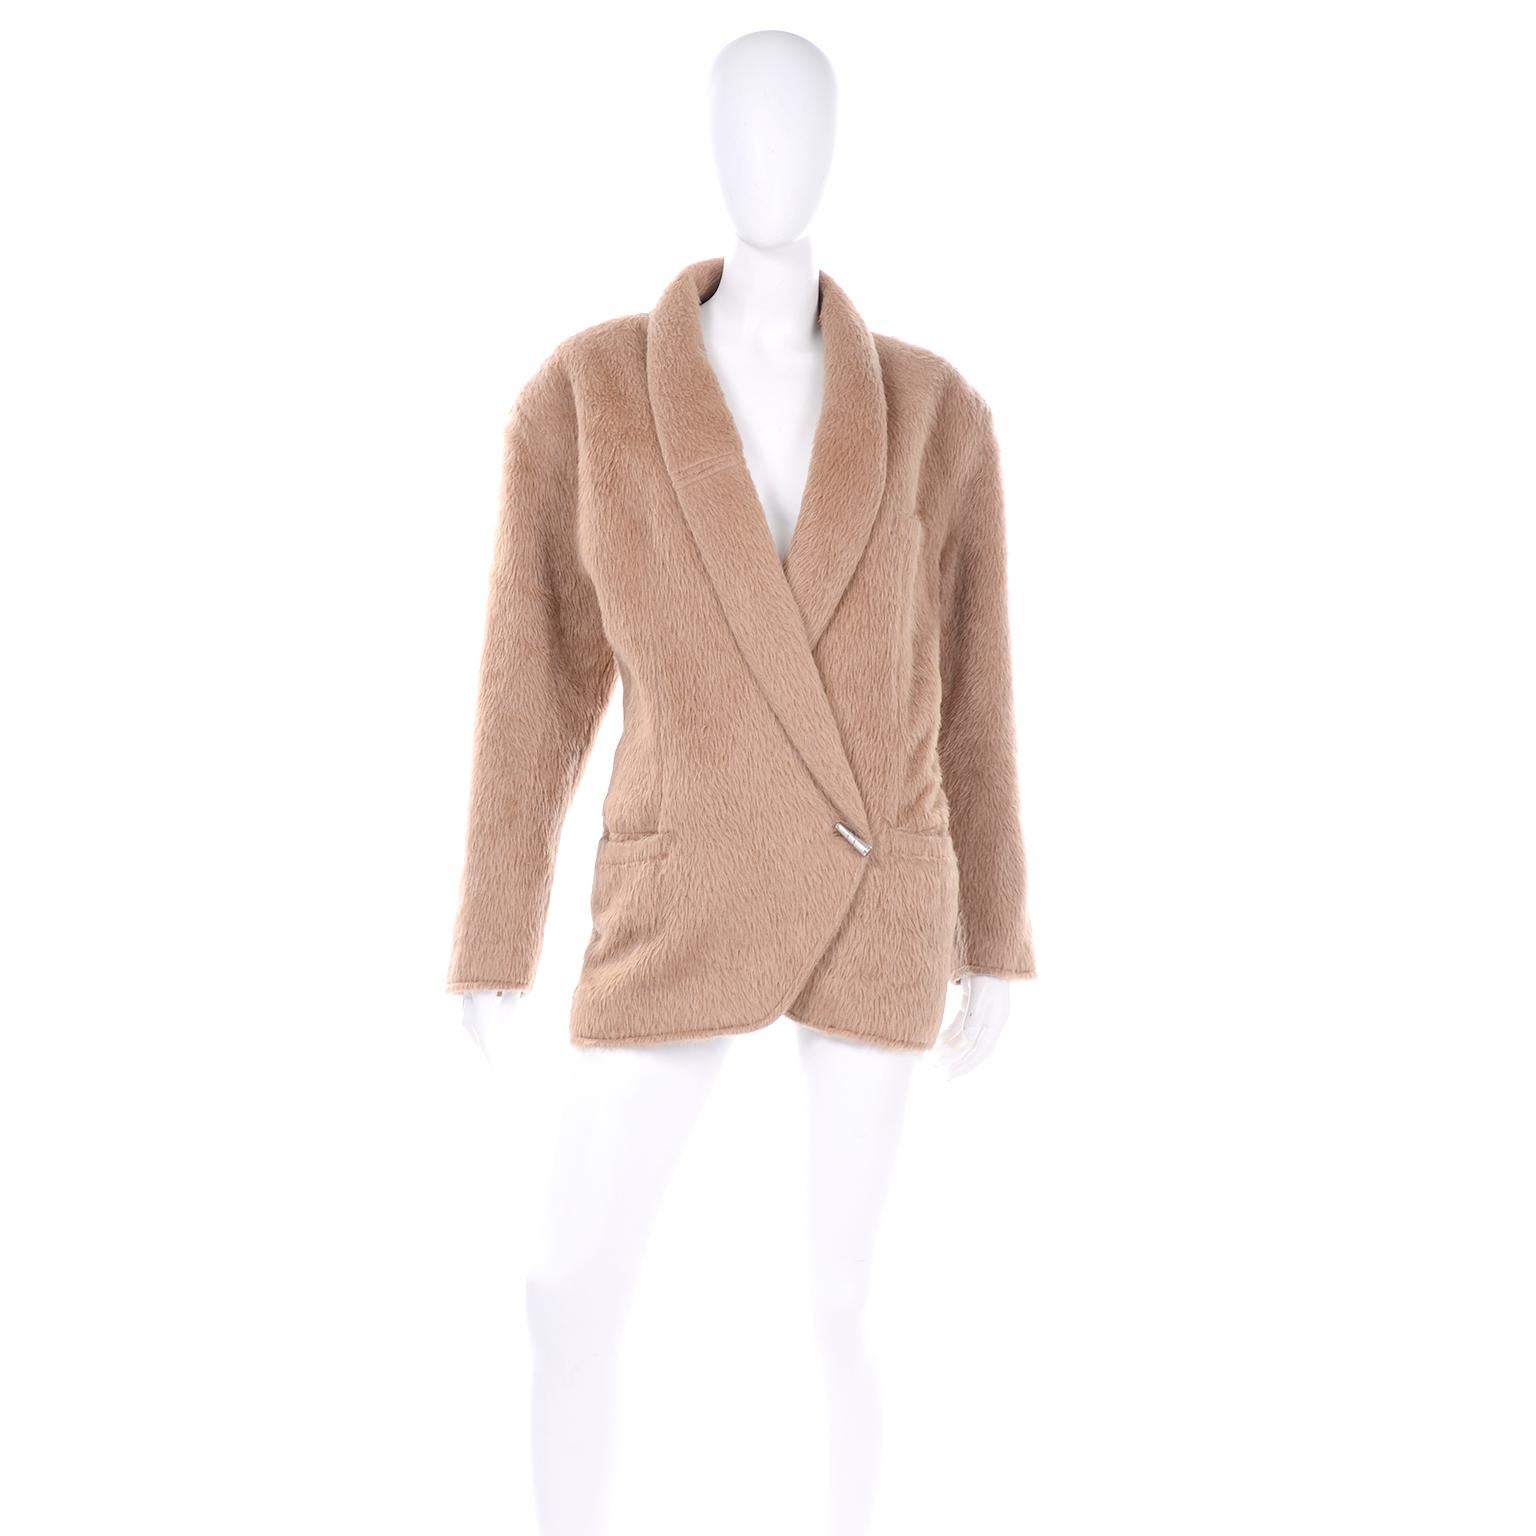 This 1980's vintage Gianni Versace oversized jacket is absolutely amazing! We love the fuzzy camel color alpaca wool blend for this particular silhouette.  This jacket has shoulder pads, 3 functional pockets and an internal button closure to create